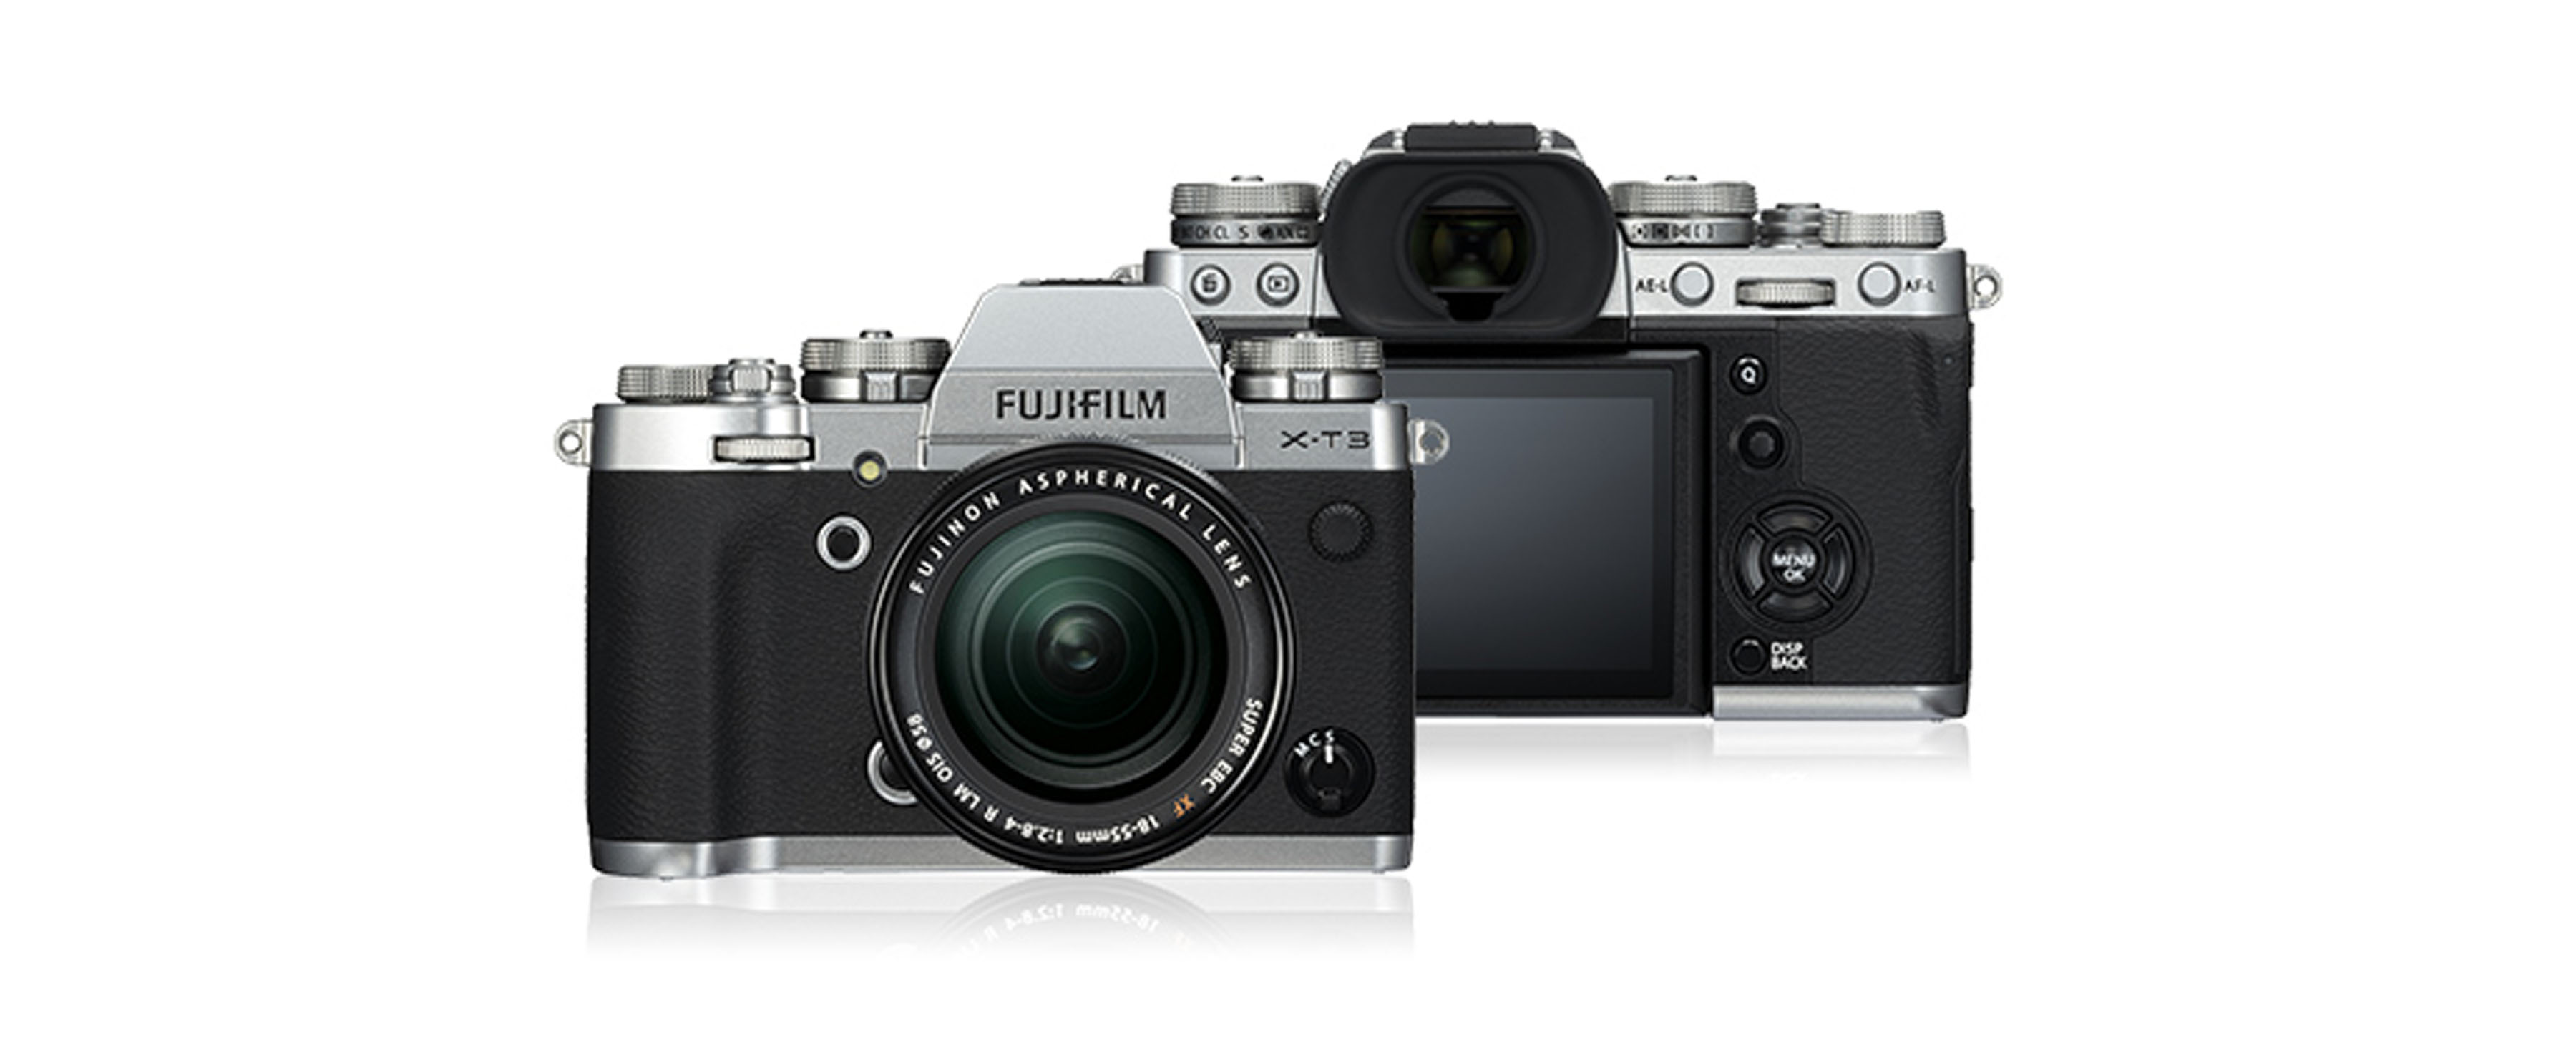 snor envelop cijfer Fujifilm X-T3 Mirrorless Camera Awesome Review Must Check